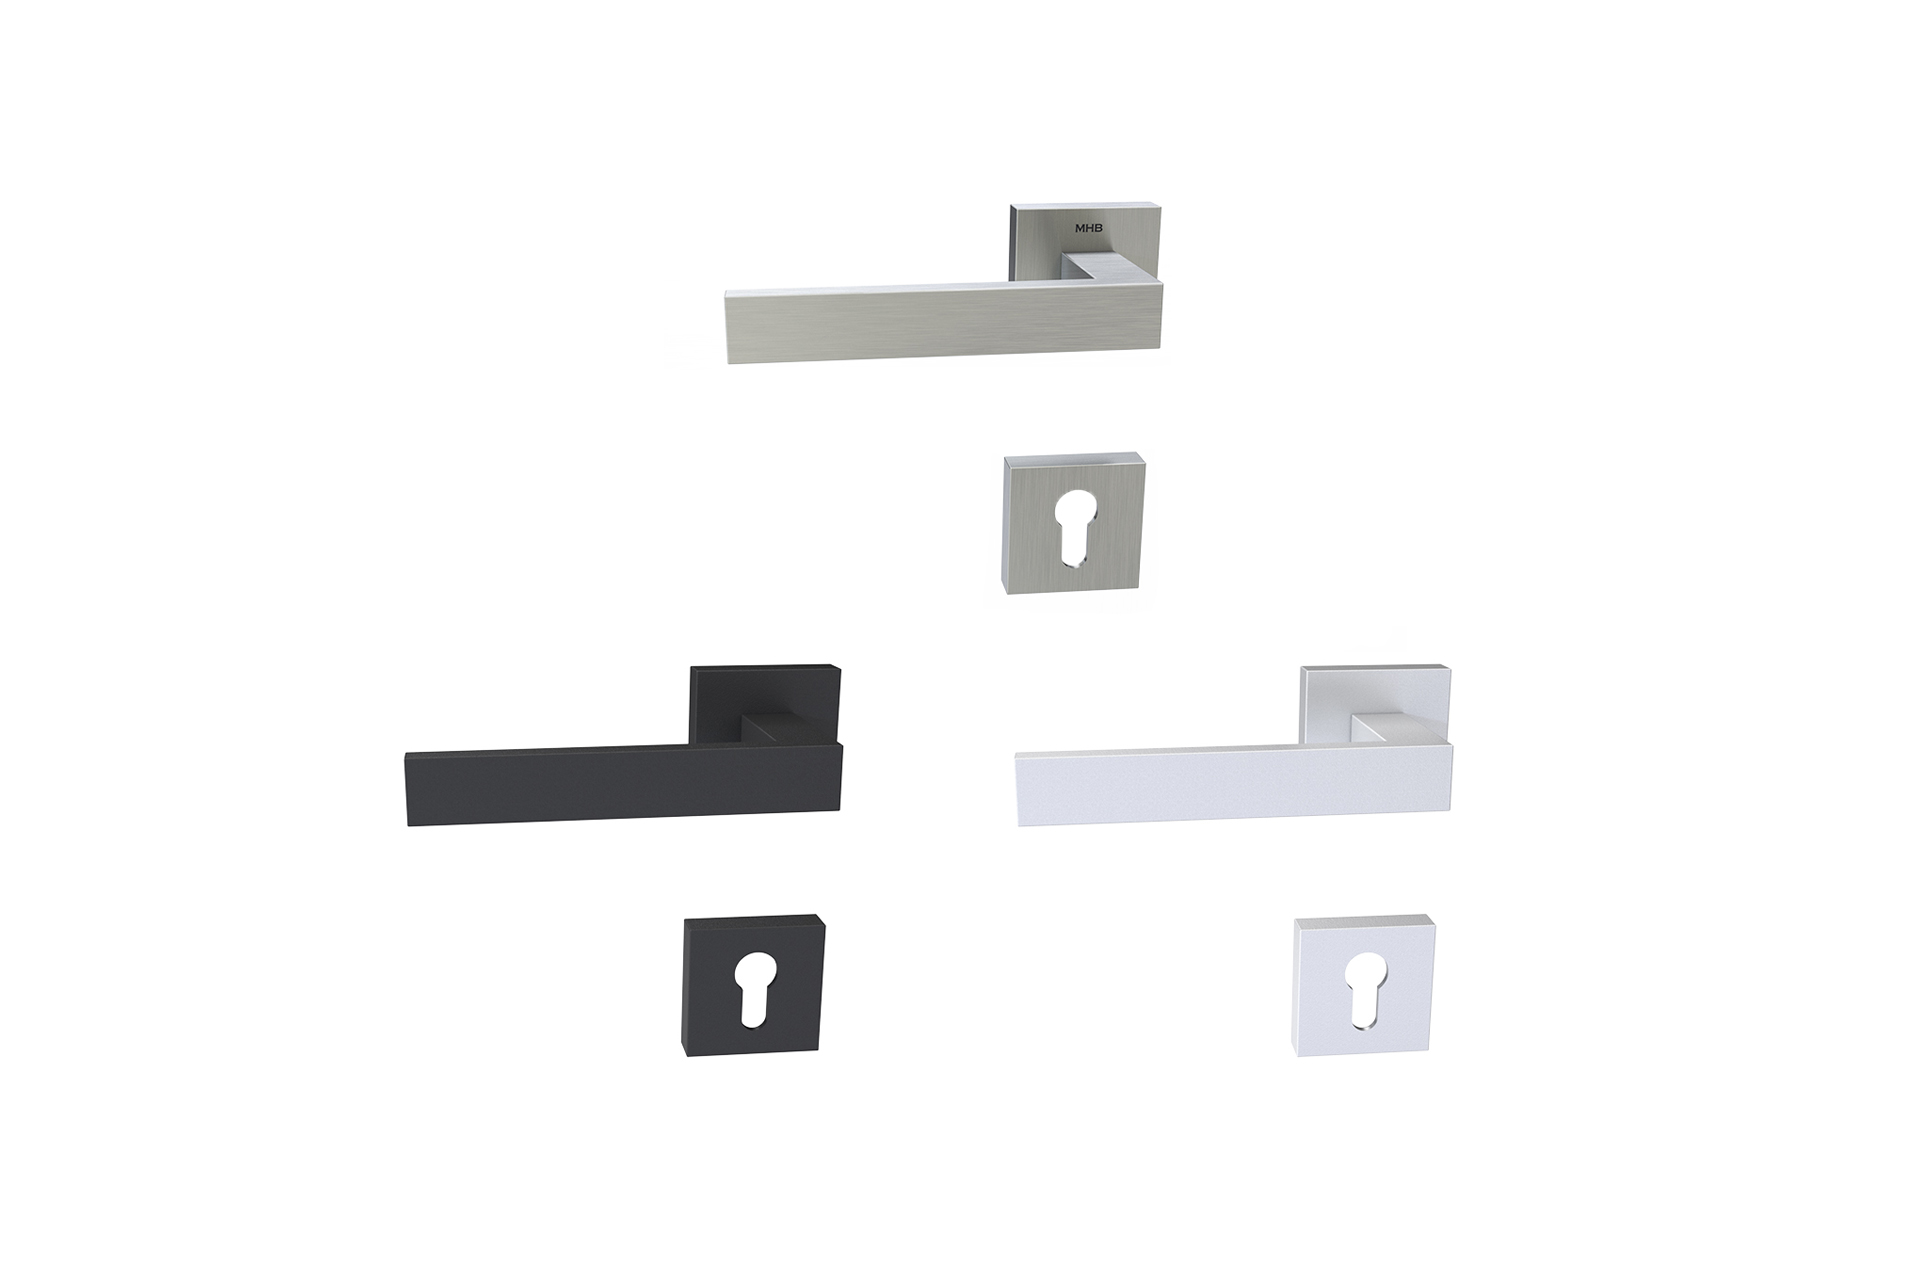 3d rendering overview of MHB steel handles and escutcheons in different finishes